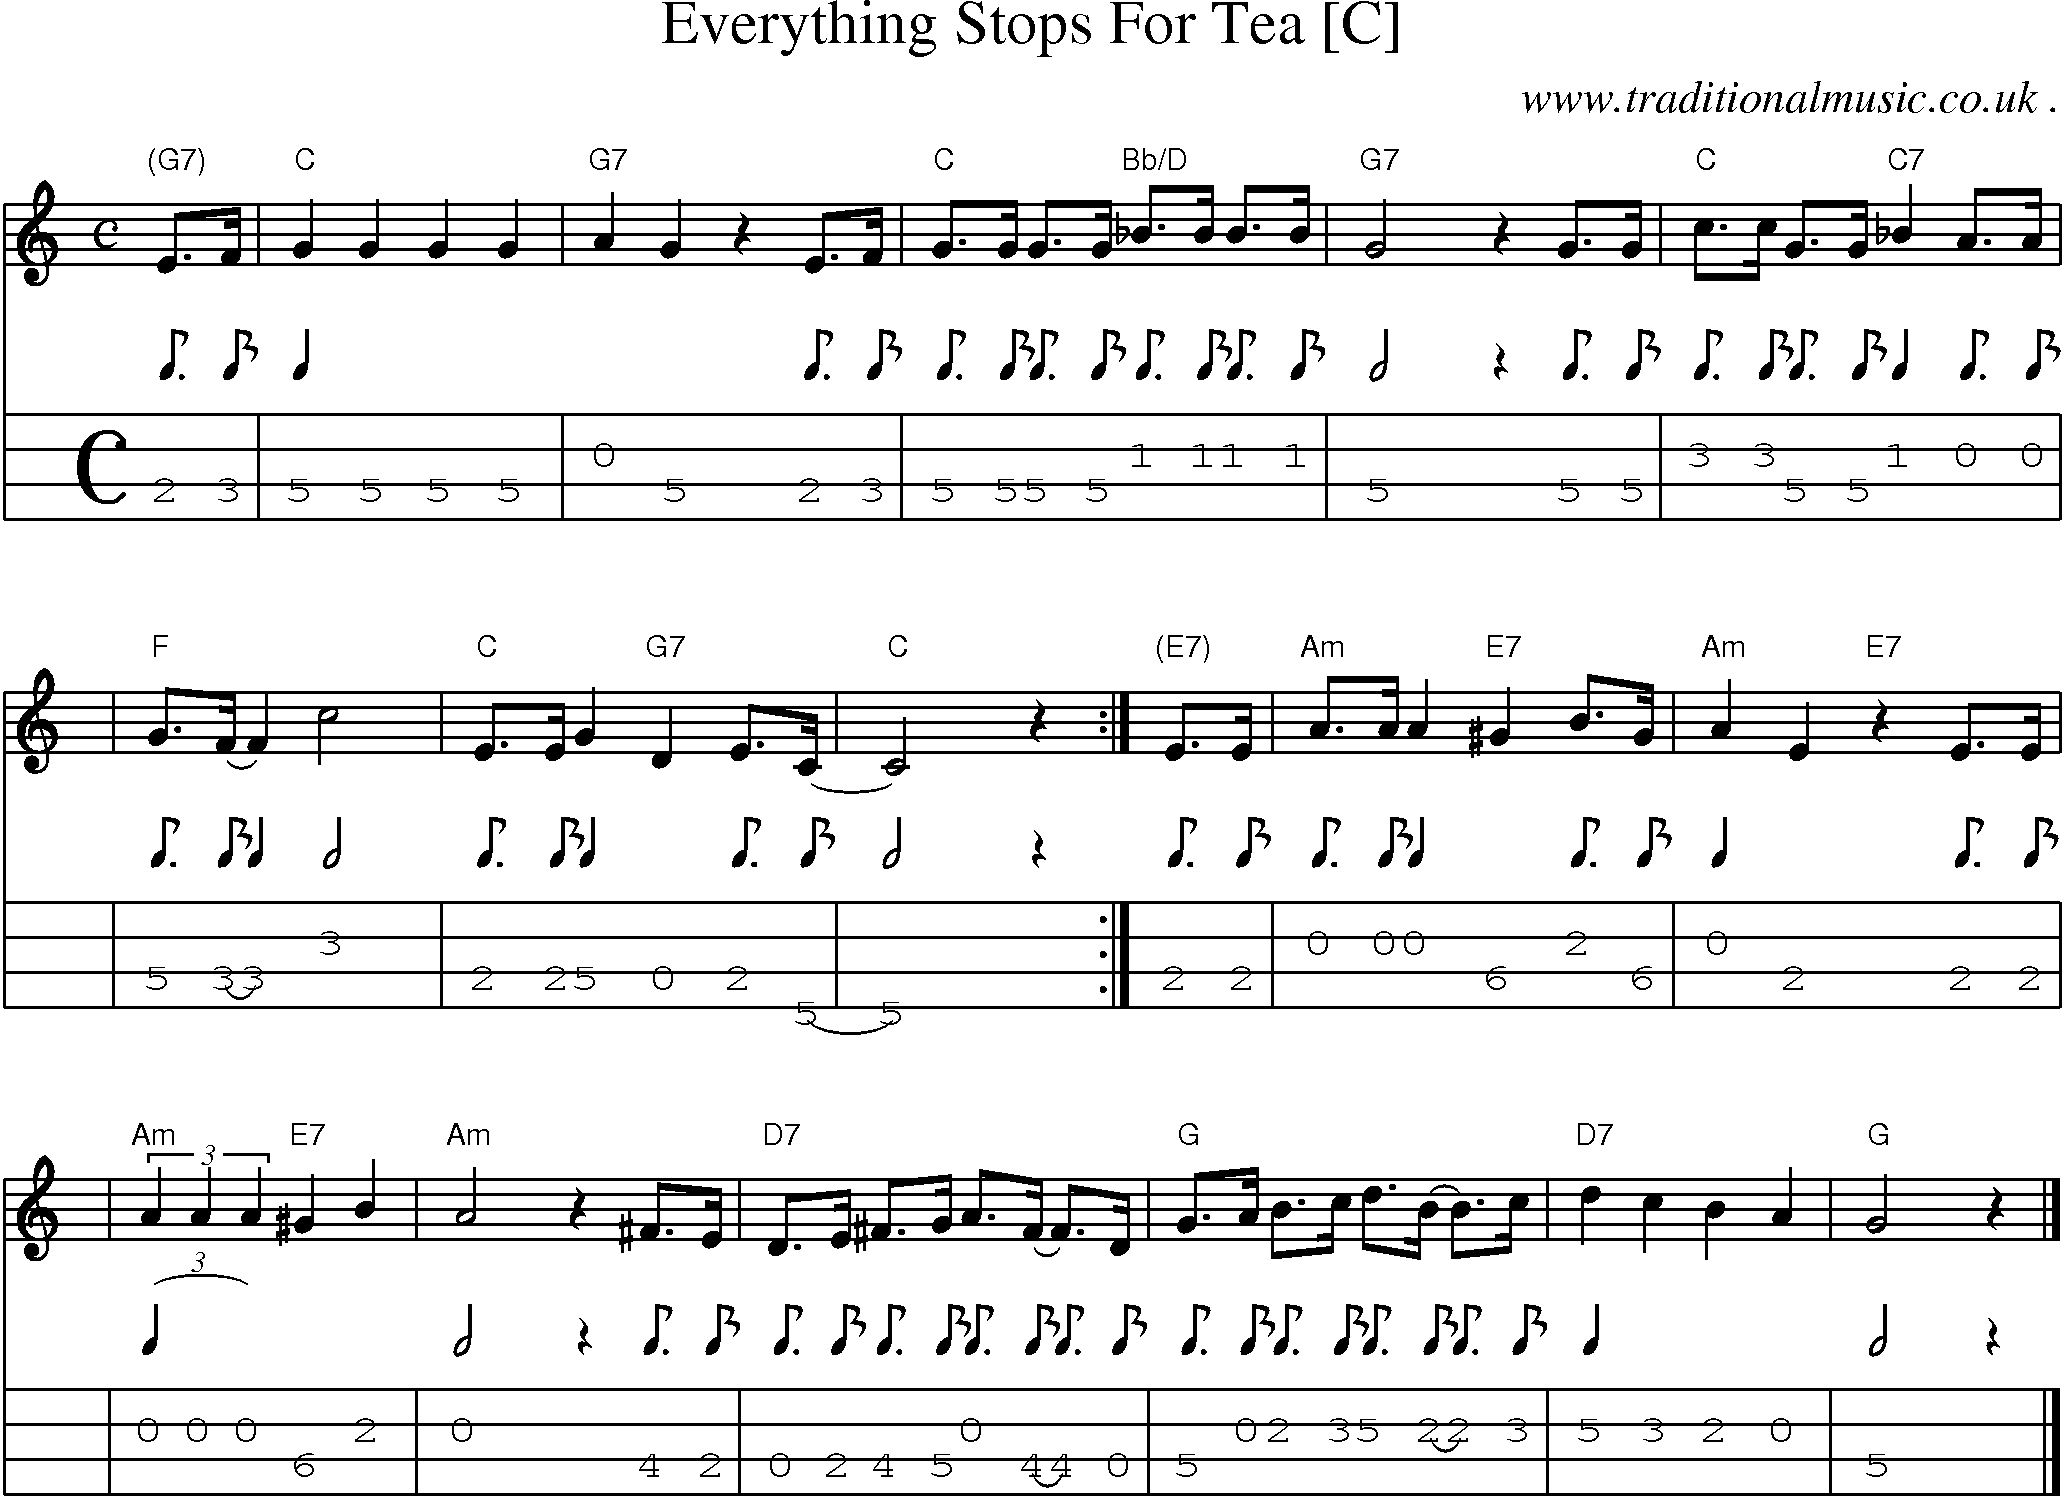 Sheet-music  score, Chords and Mandolin Tabs for Everything Stops For Tea [c]